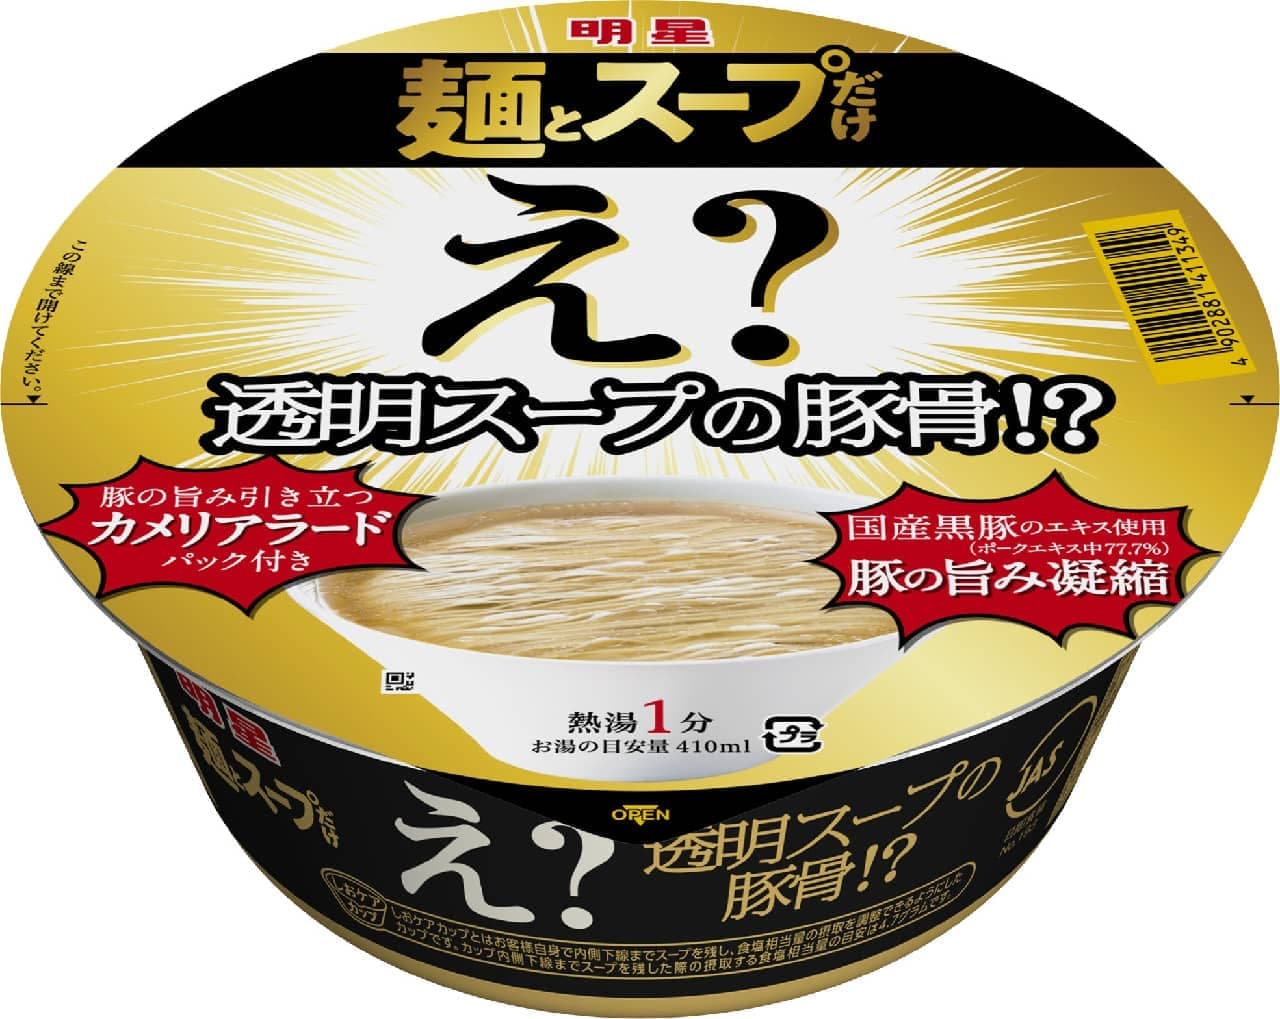 Meisei Foods "Meisei Noodles and Soup Only, What? Pork bone broth in clear soup?